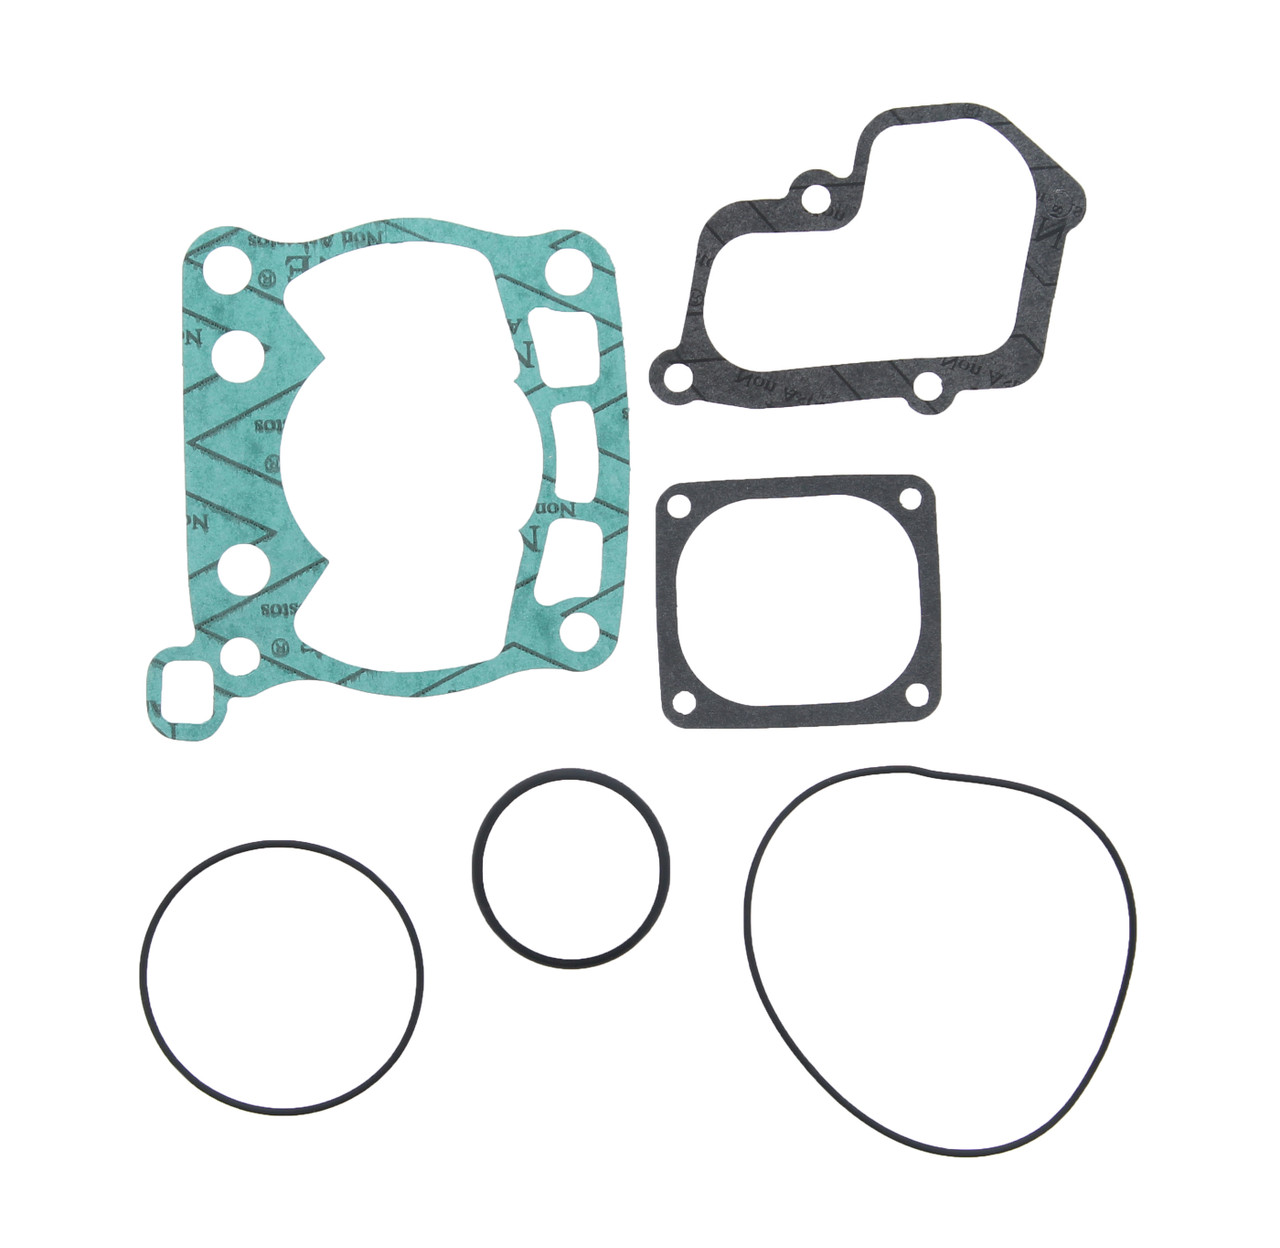 Top End Gasket Kit fits Suzuki RM125 RM 125 1992 1997 by Race-Driven